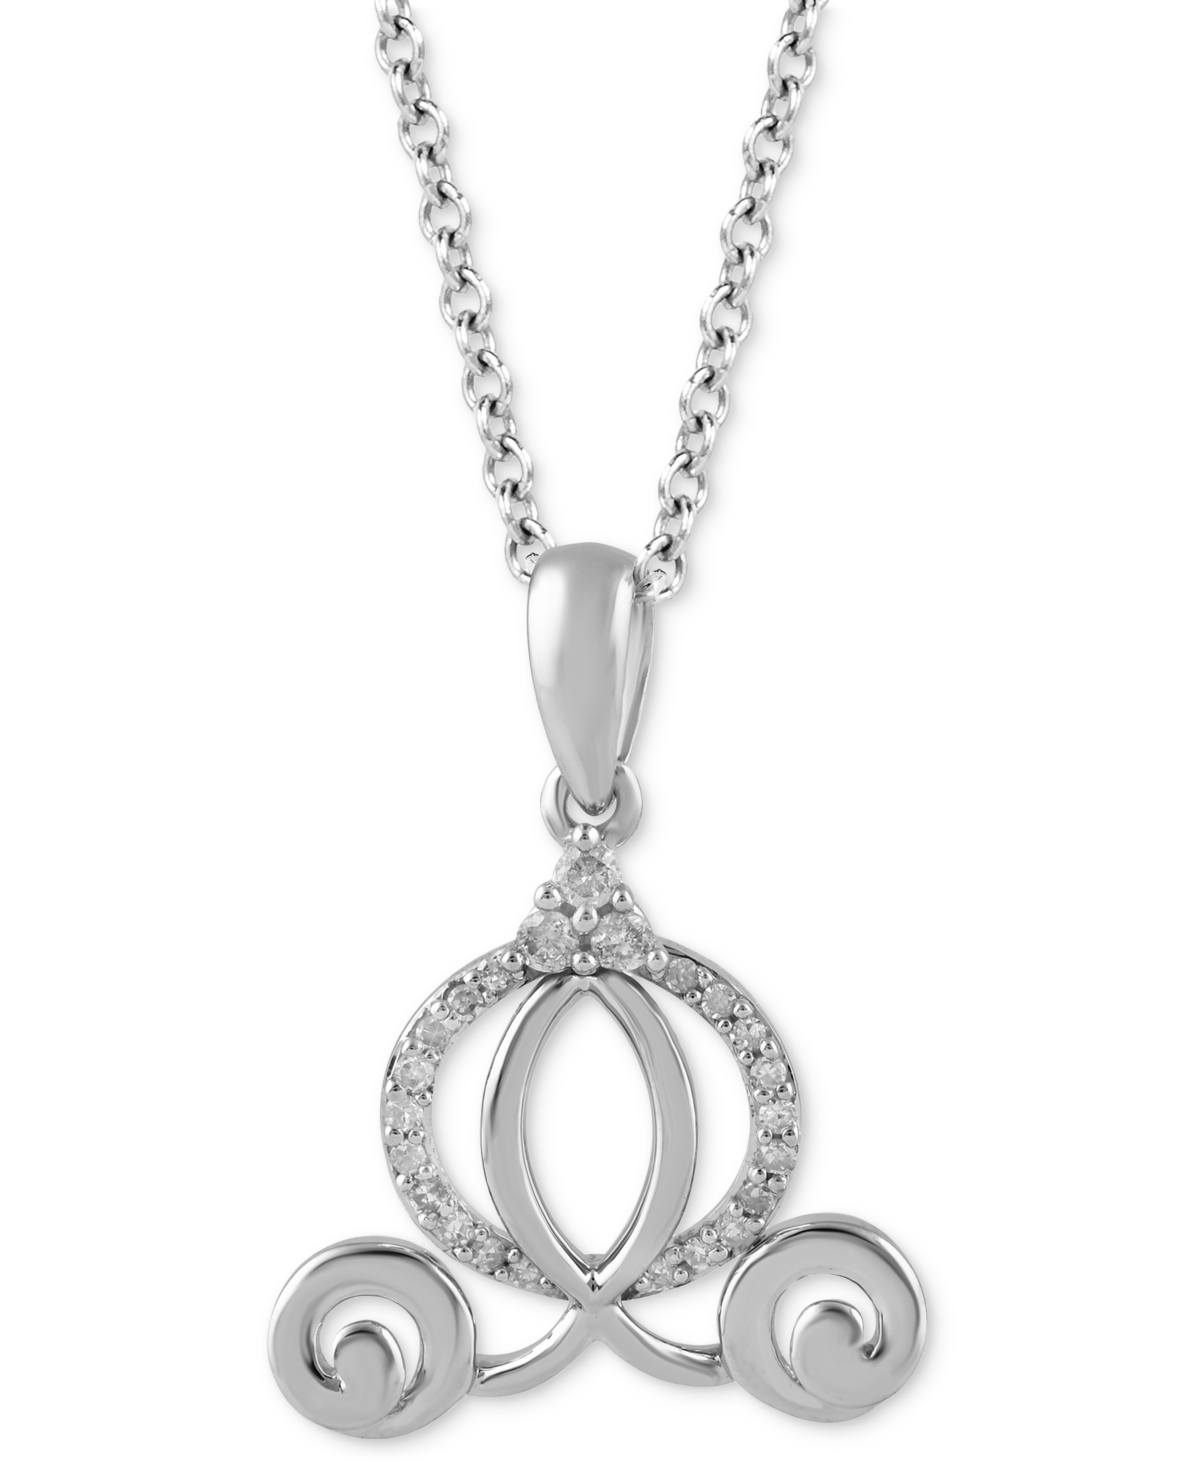 Enchanted Disney Fine Jewelry Diamond Cinderella Carriage Pendant Necklace (1/10 Ct. T.w.) In Sterling Silver, 16" + 2" Extender